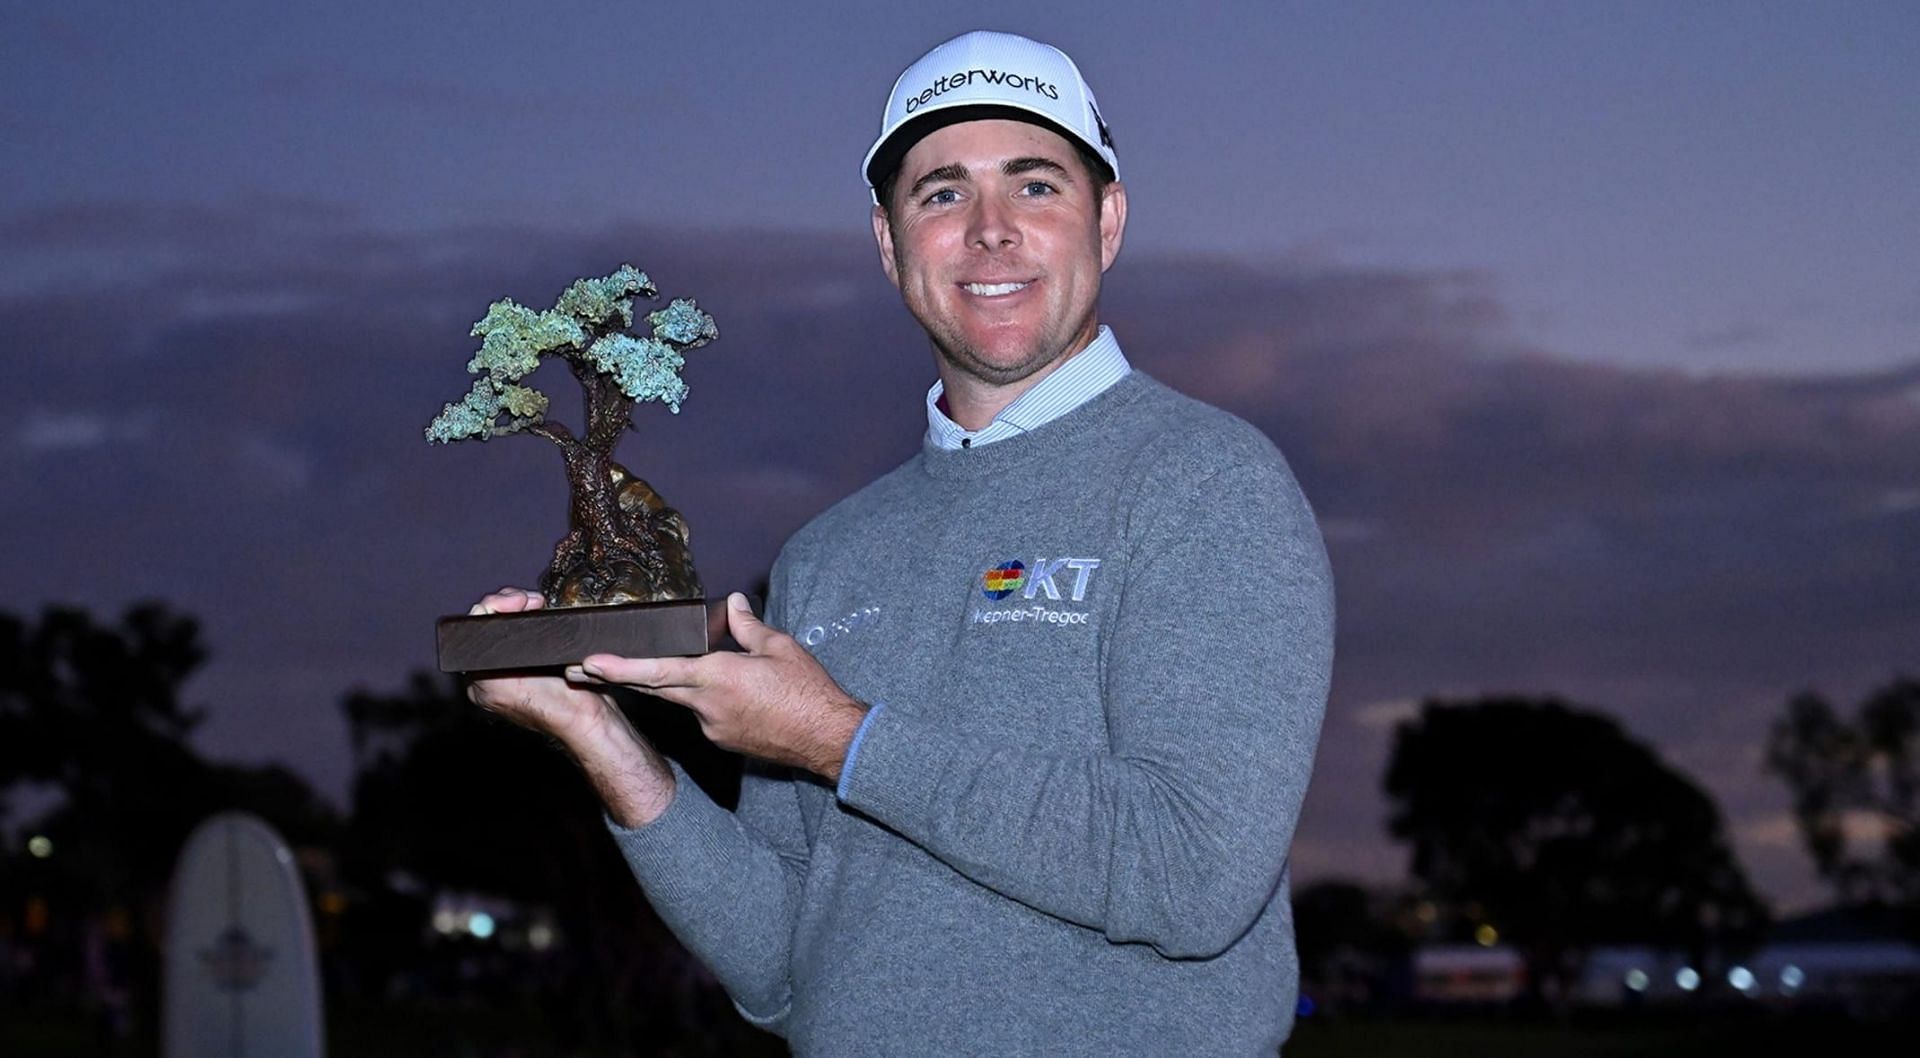 Luke List surprised everyone with his Farmers Insurance Open win last year